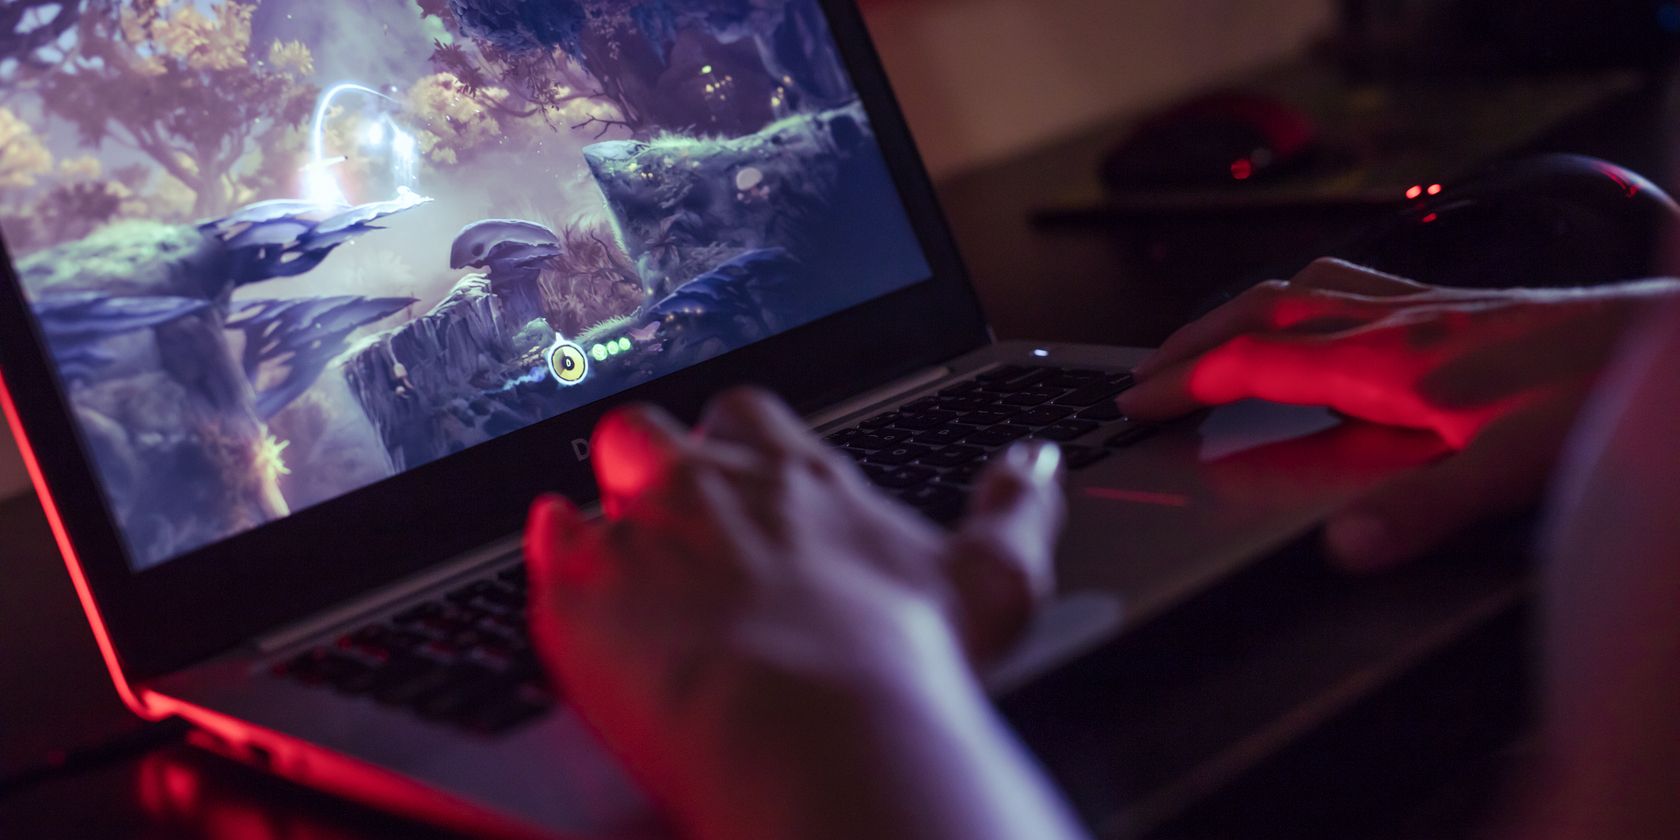 The Pros and Cons of Buying a Gaming Laptop